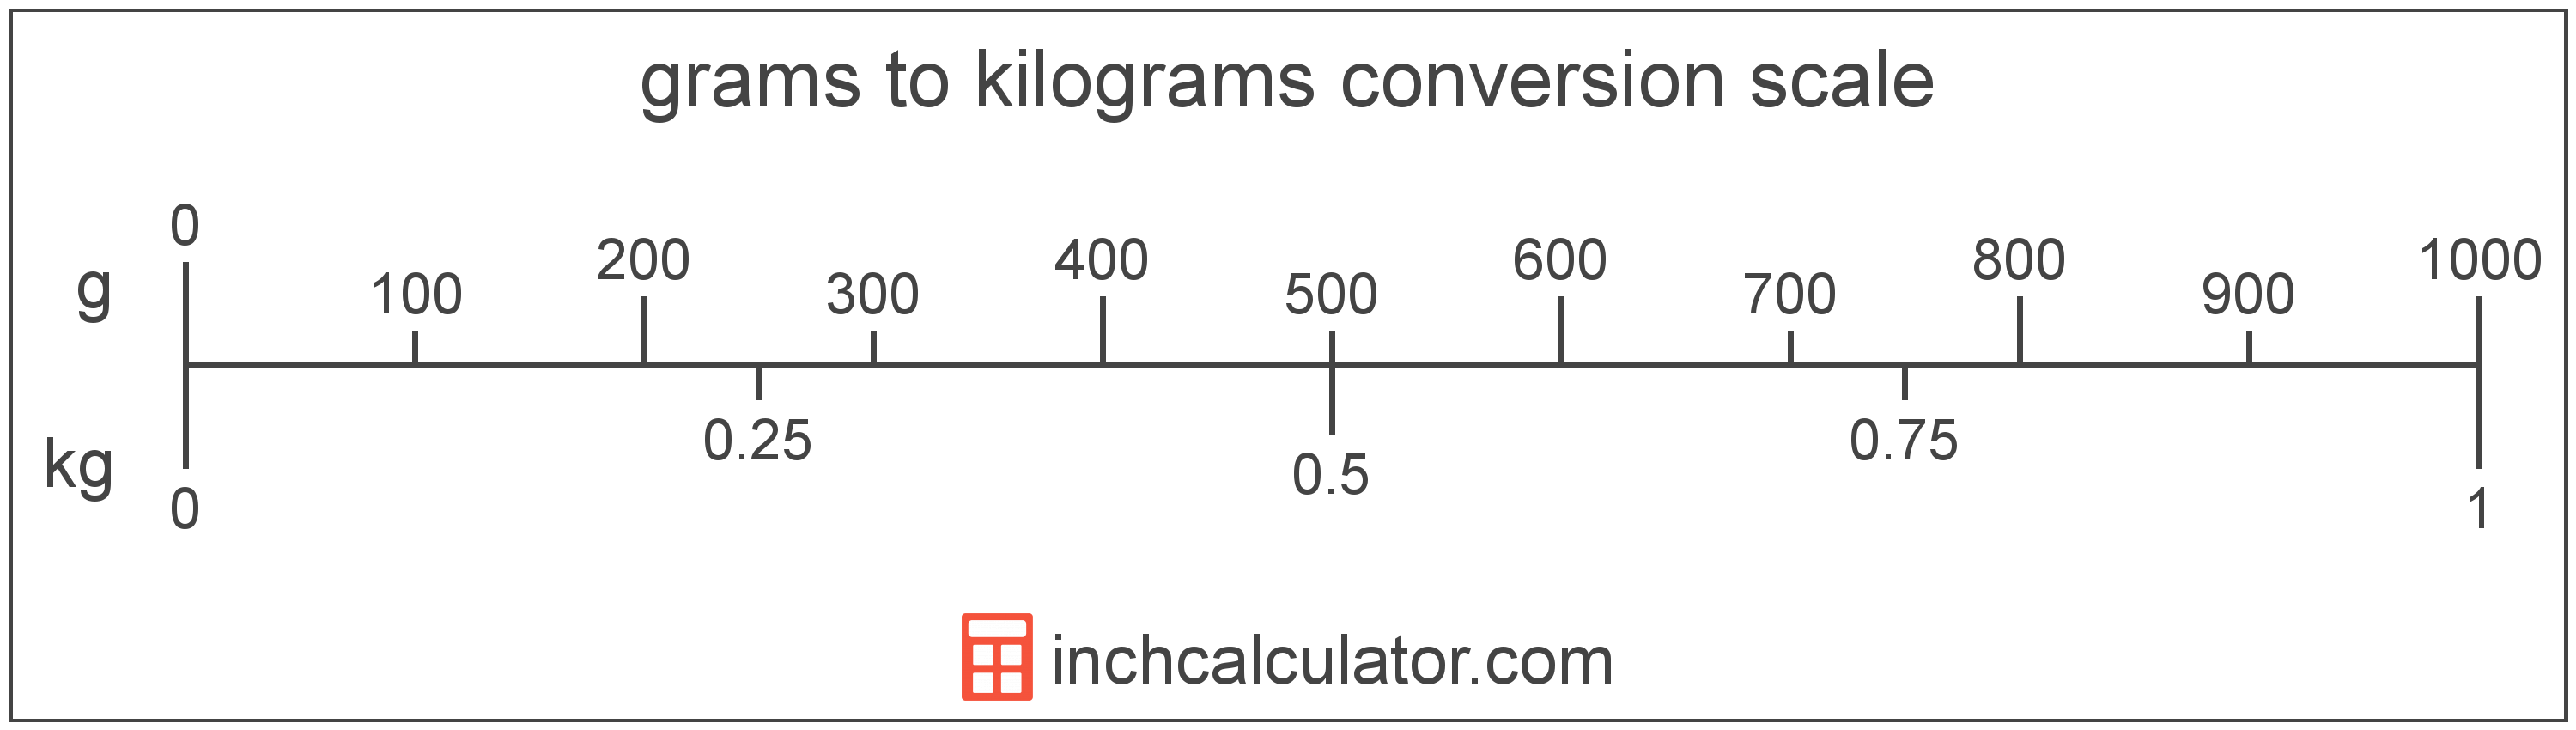 conversion scale showing grams and equivalent kilograms weight values